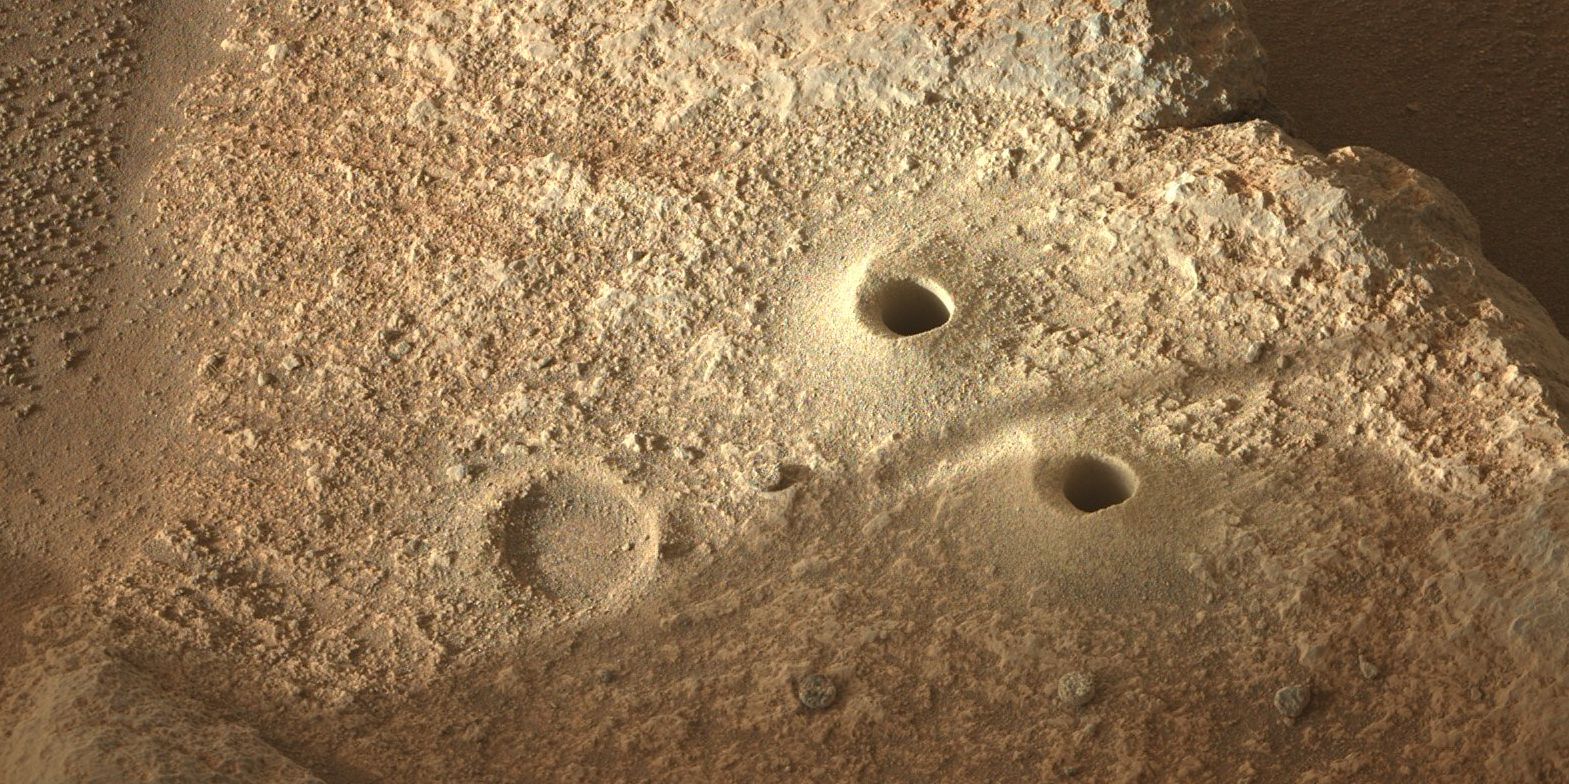 has a rover ever been to the face of mars